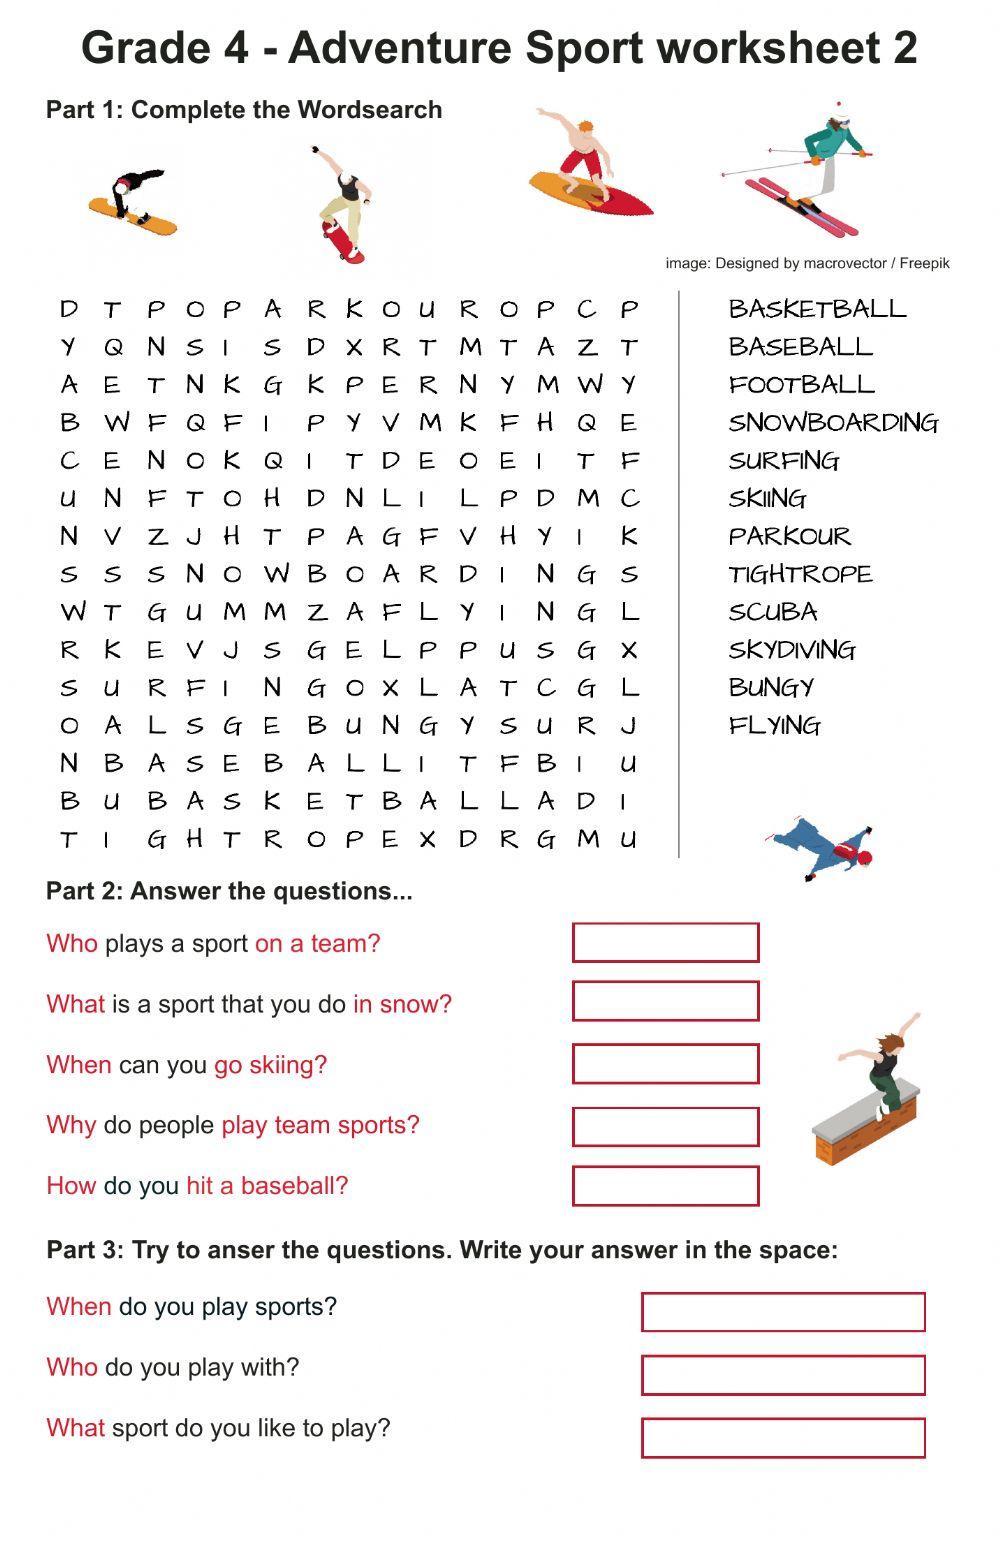 Sport vocabulary- word search and Q&A